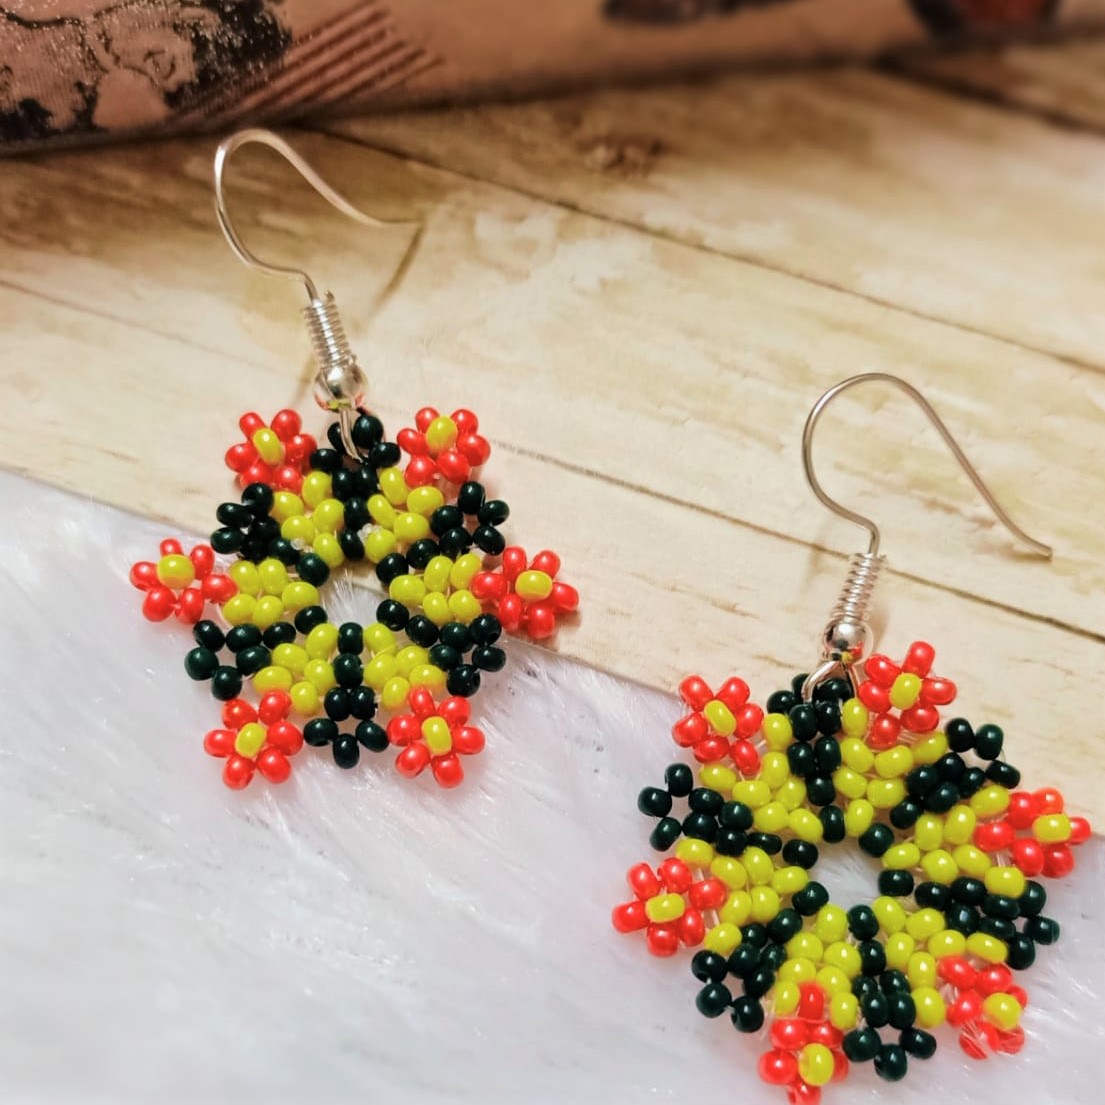 Green and yellow beaded earing